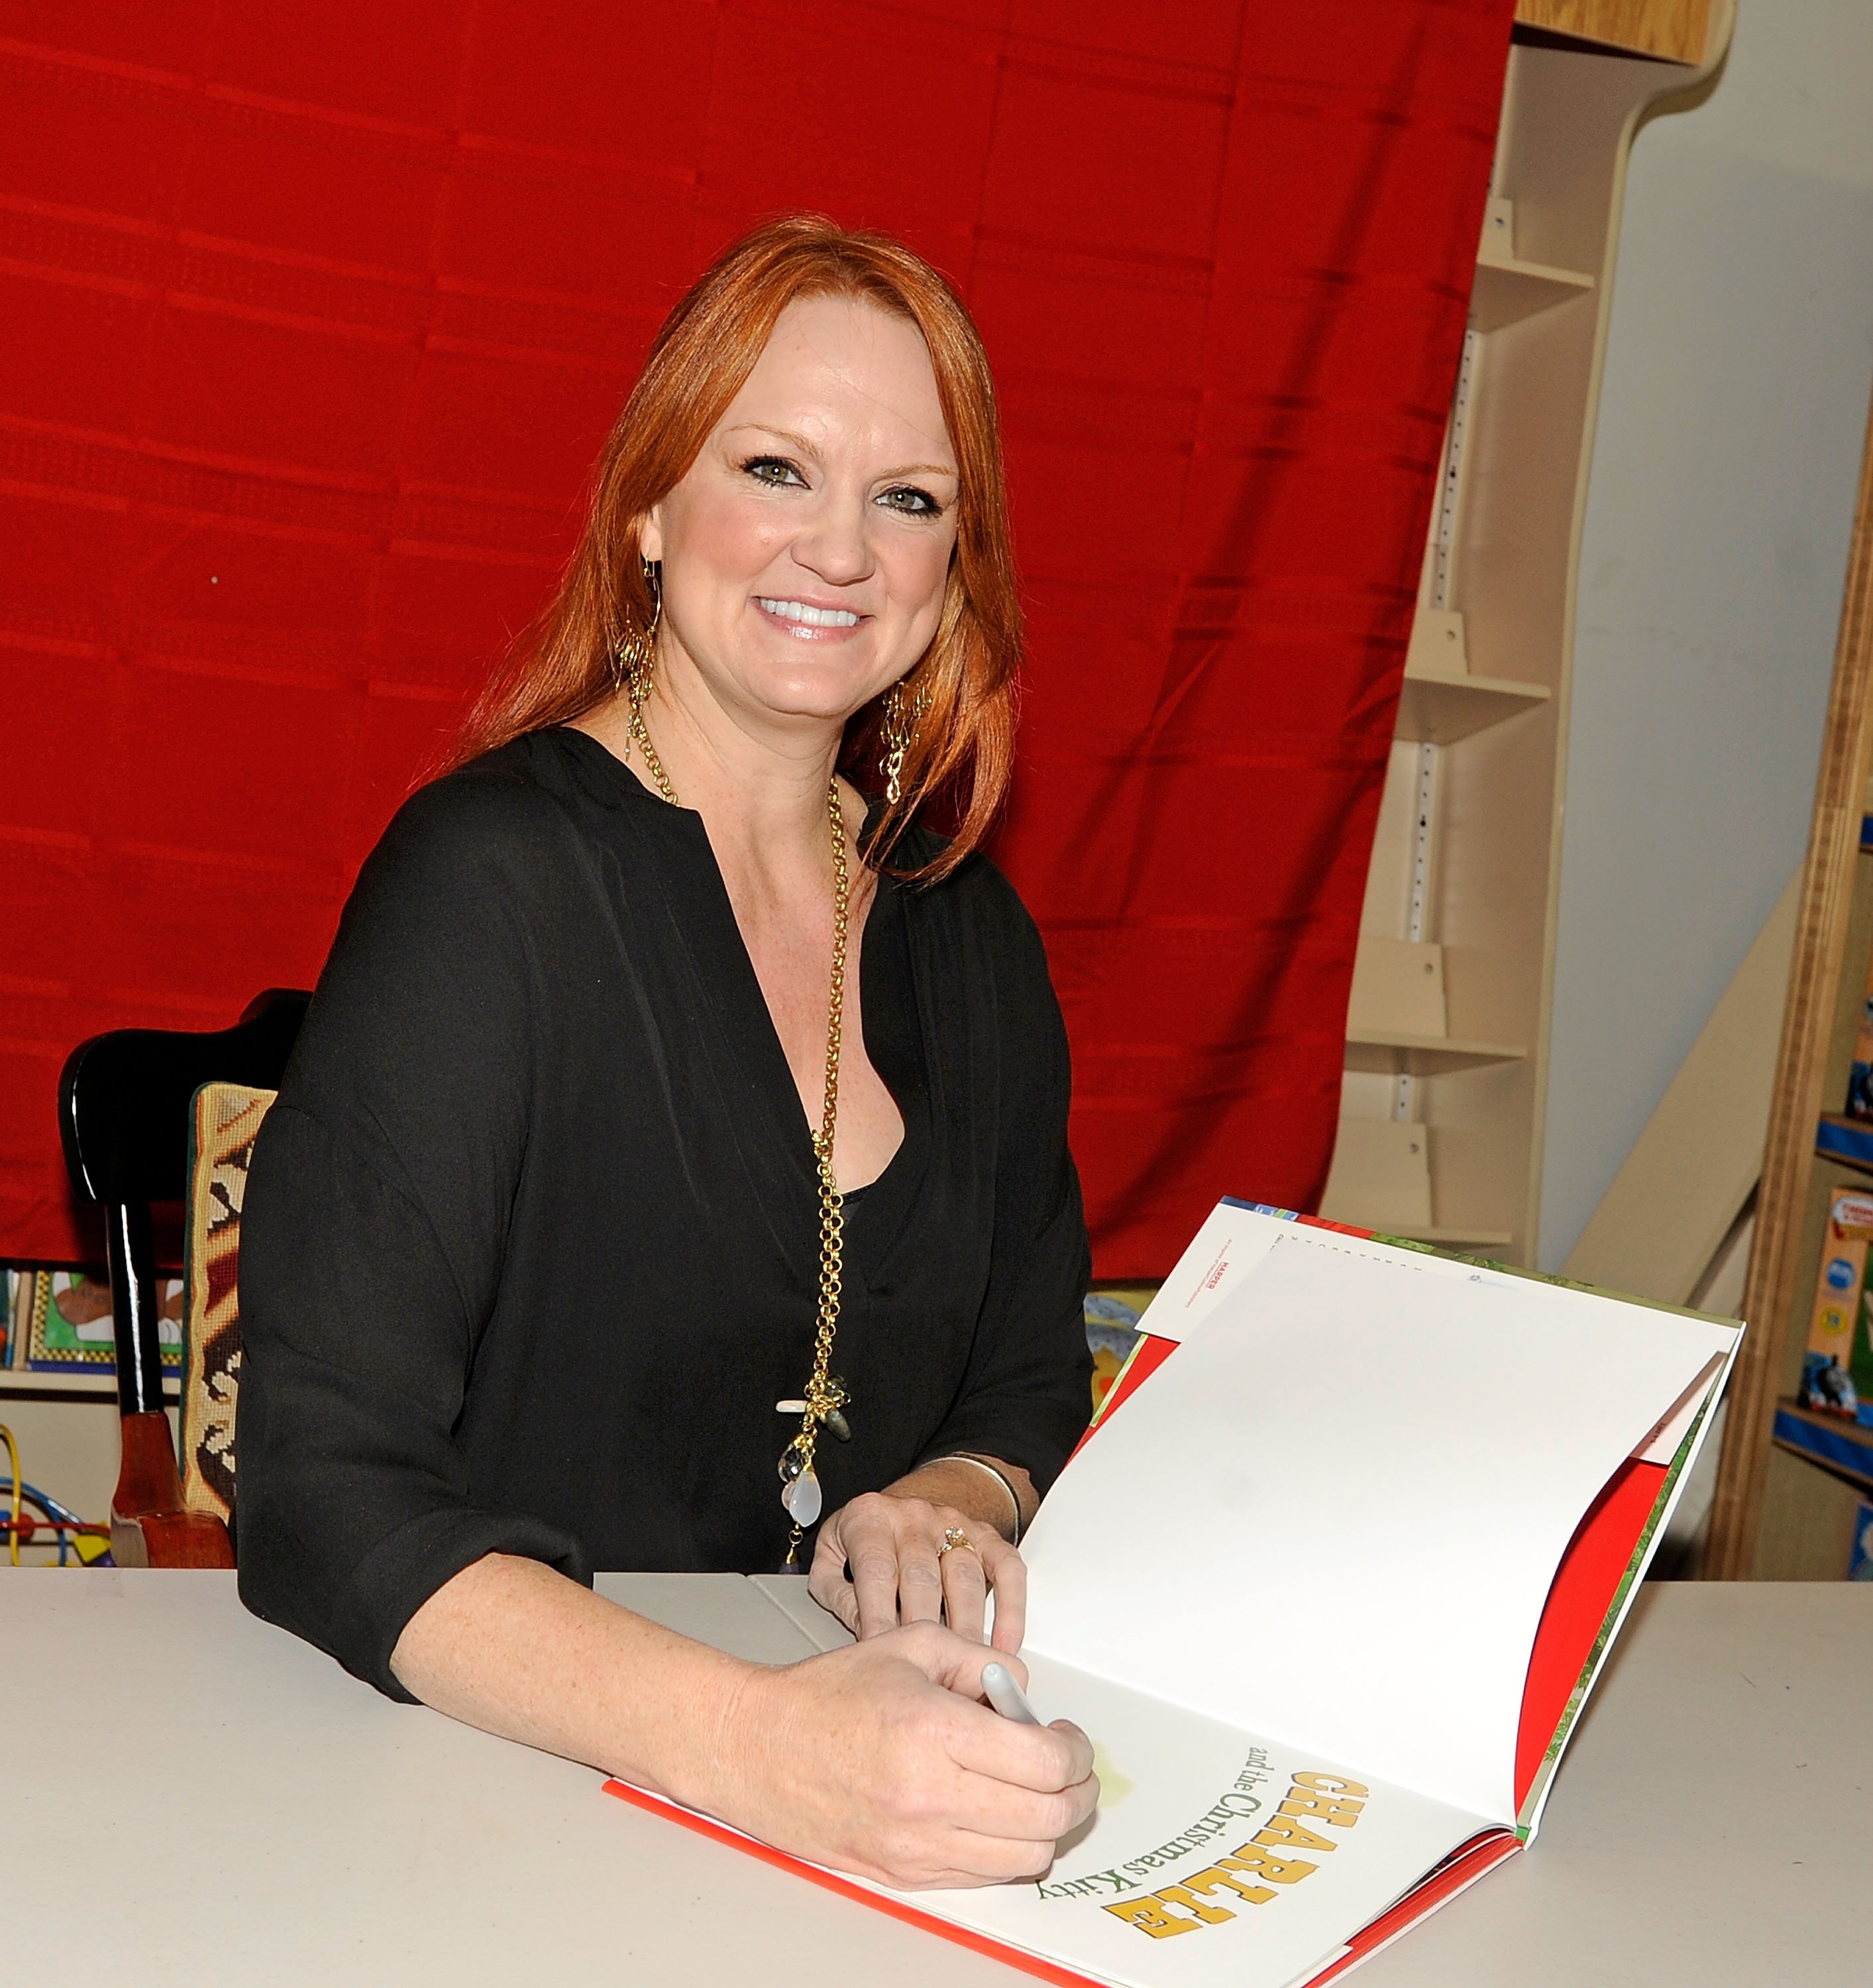 'The Pioneer Woman' Ree Drummond at a 2012 book signing